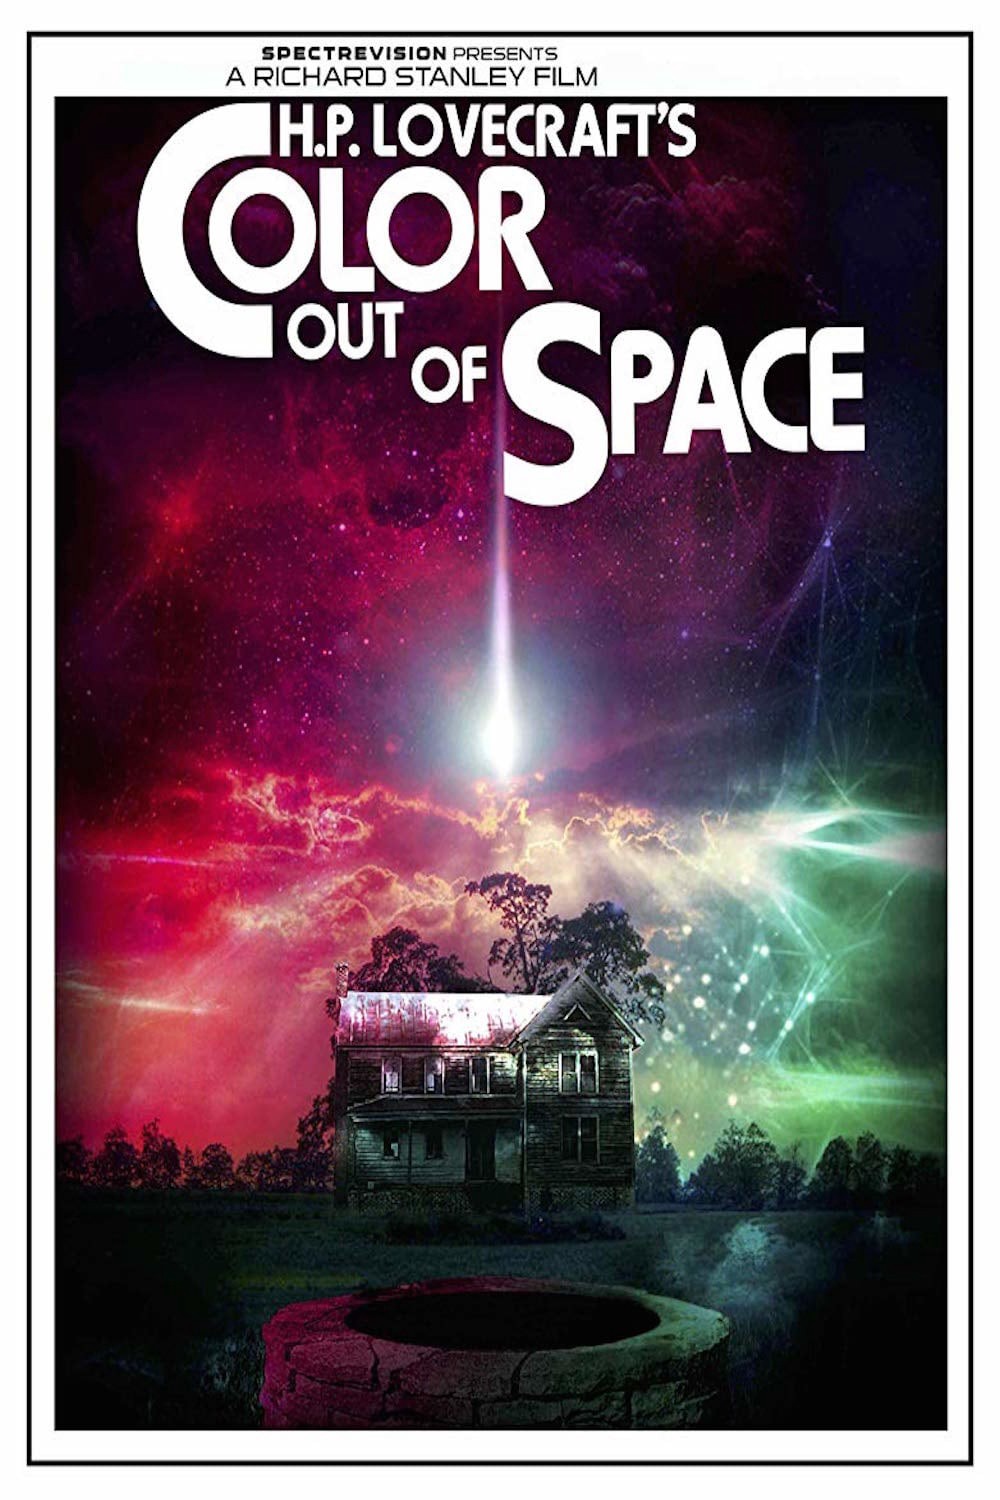 Color out space poster